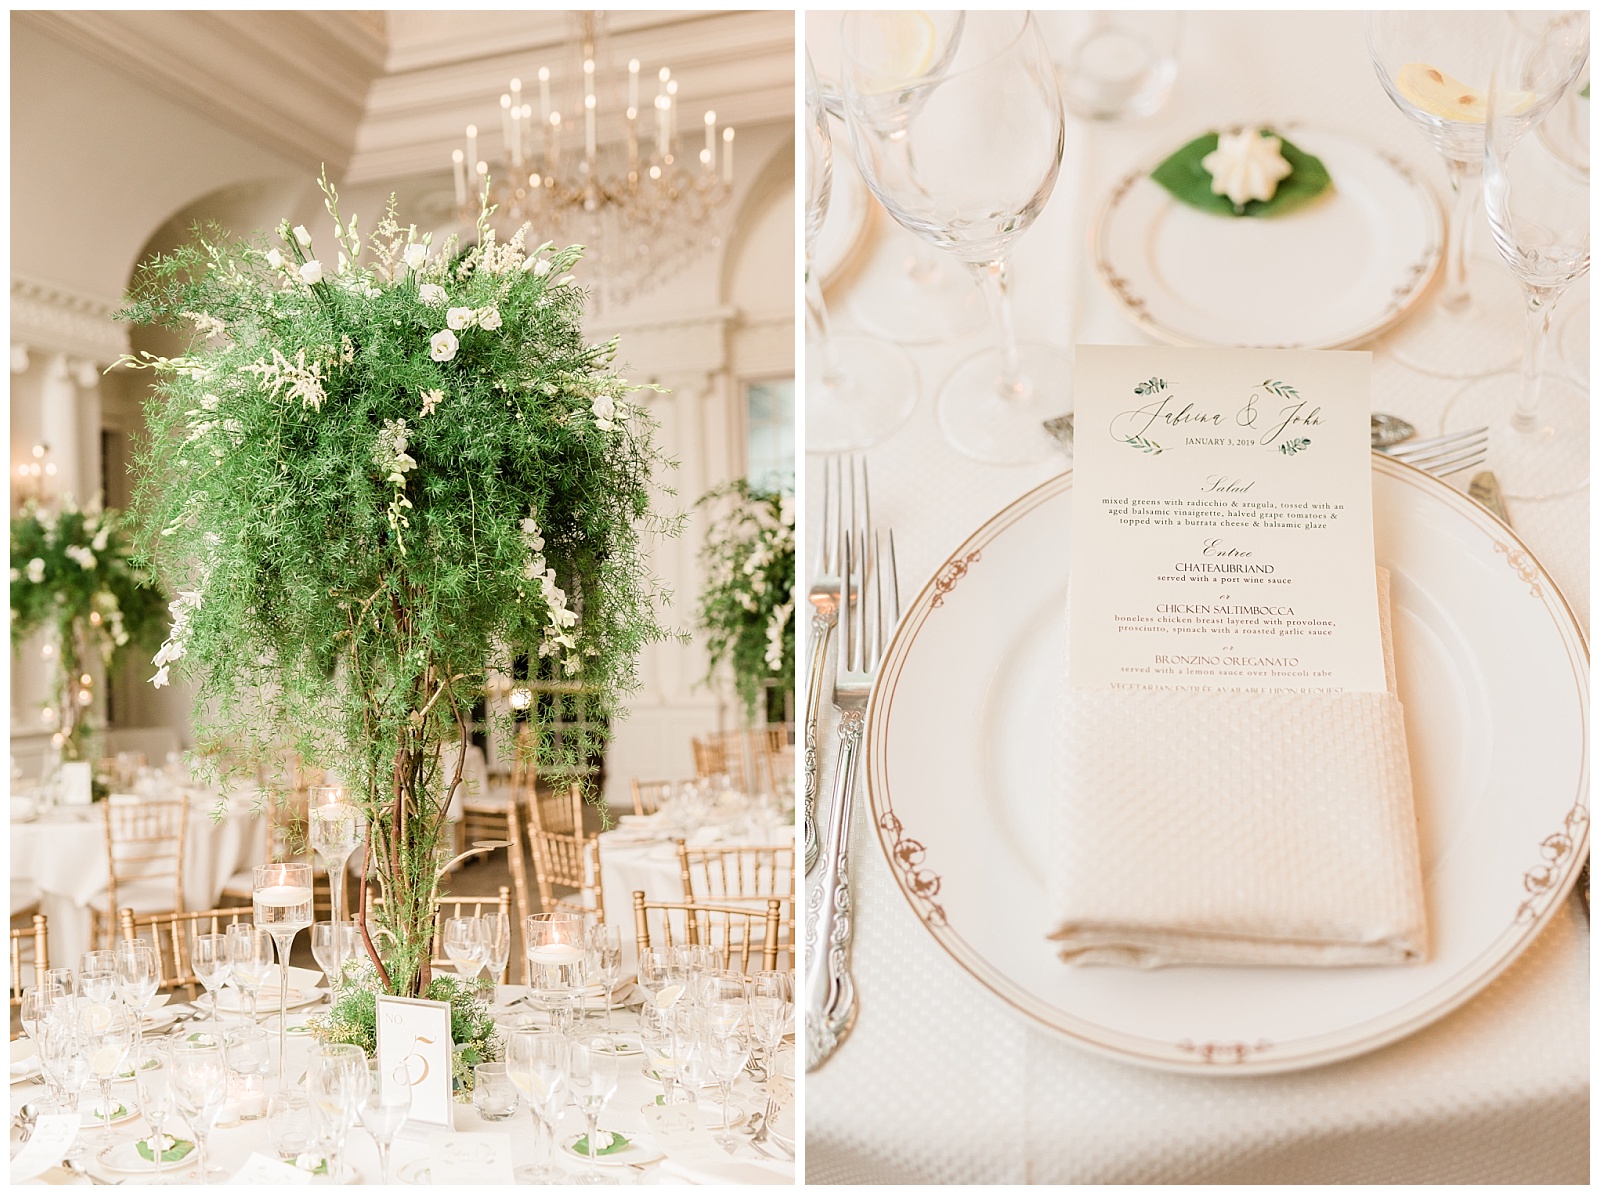 Park Chateau Wedding, Photographer, New Jersey, NJ, Winter, Reception Details, Ballroom, Centerpieces, Place Settings, Menu, Light and Airy